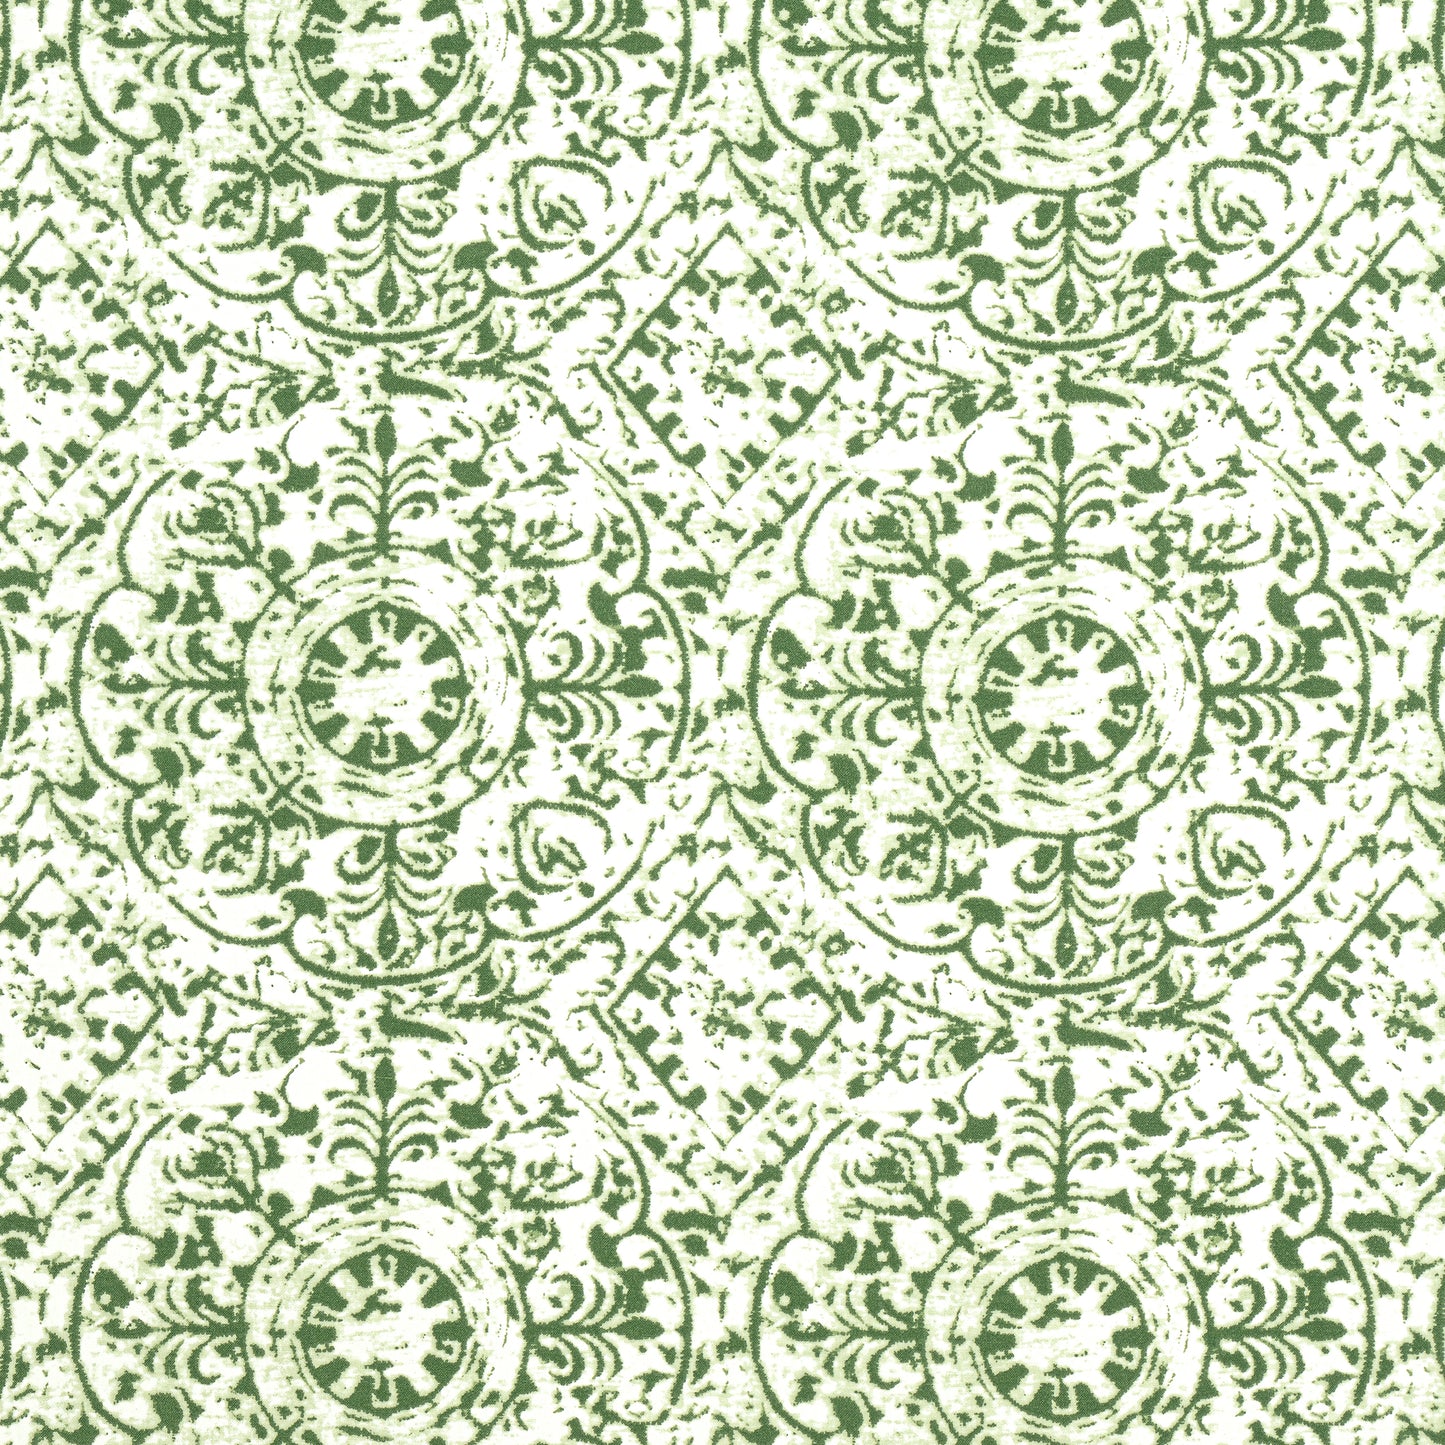 Purchase Thibaut Fabric Item F981311 pattern name Havana color Spruce